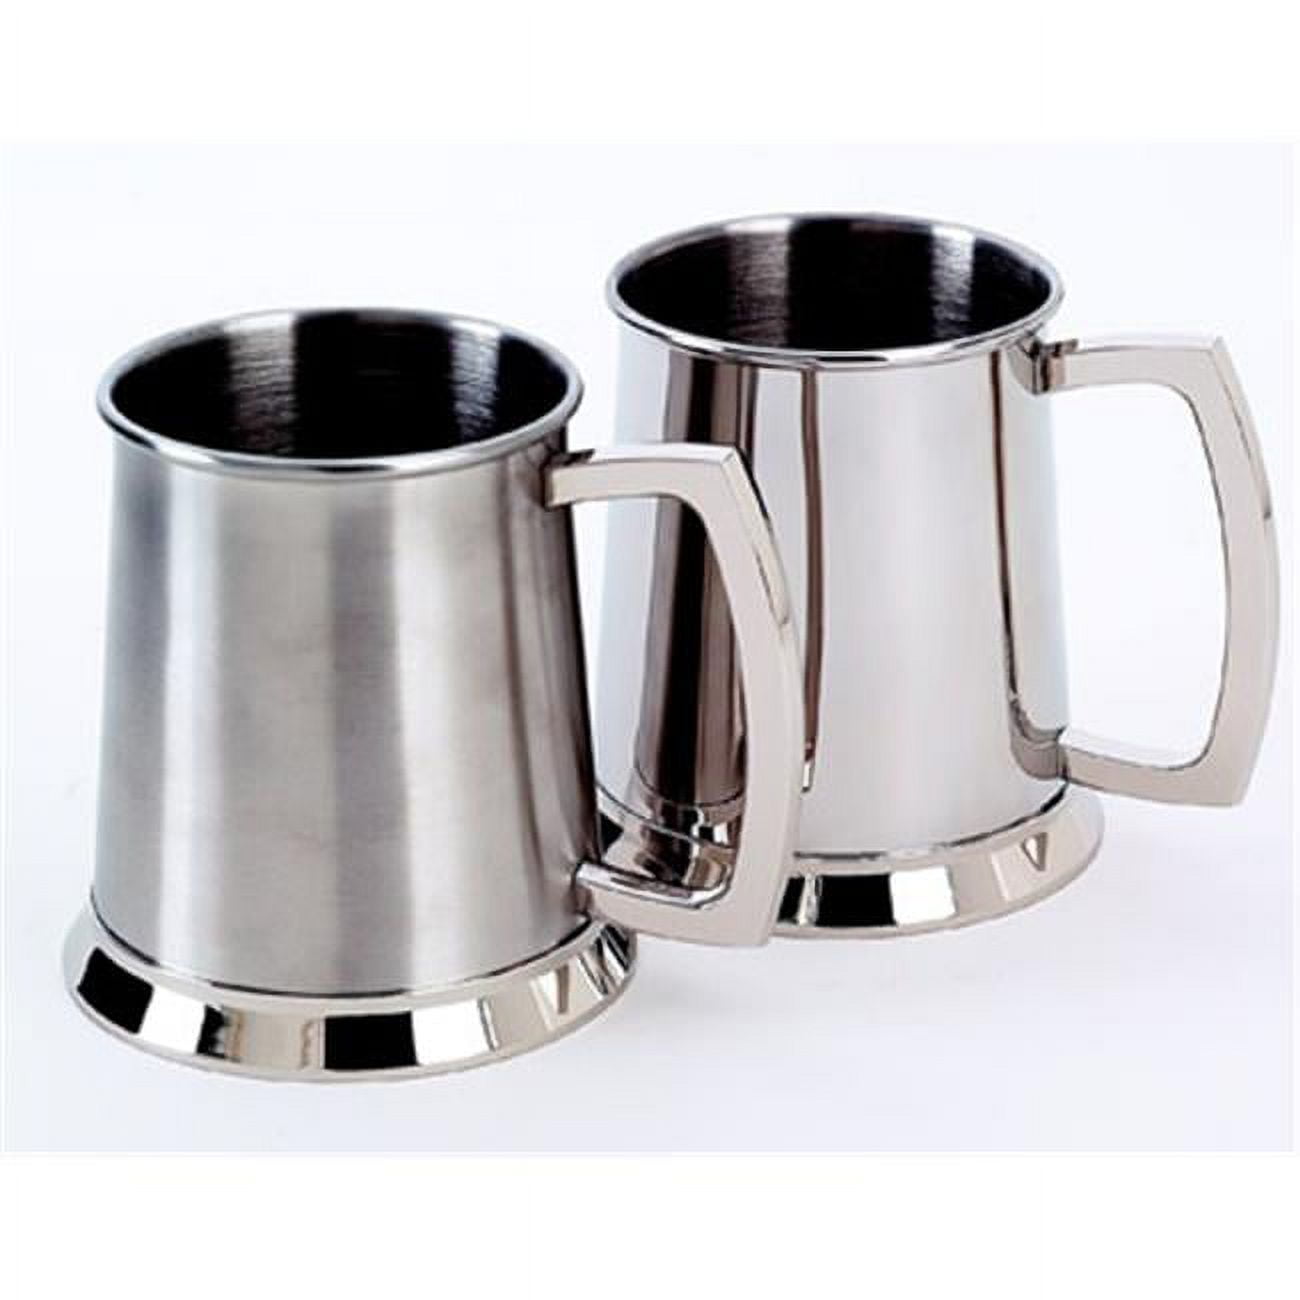 011085 20 Oz Bright Tankard Stainless Steel Cap - 4.5 In., Silver & White